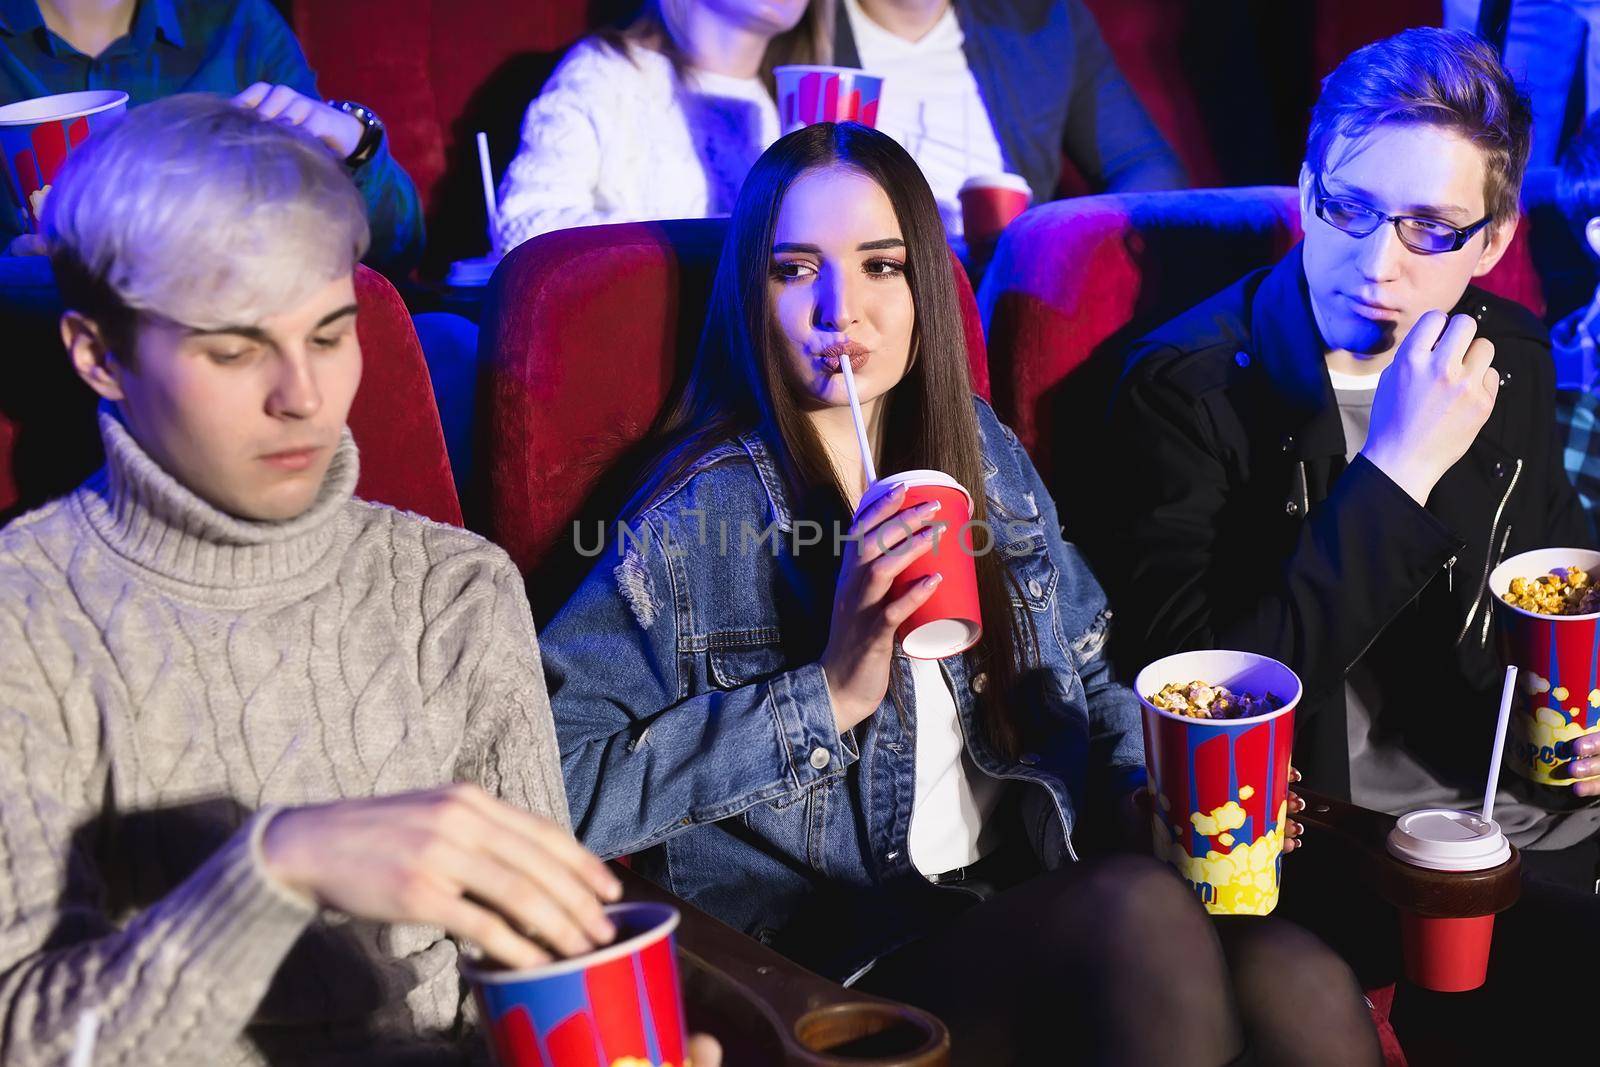 Cheerful company in the cinema. A girl drinks from a glass, a man eats popcorn by StudioPeace